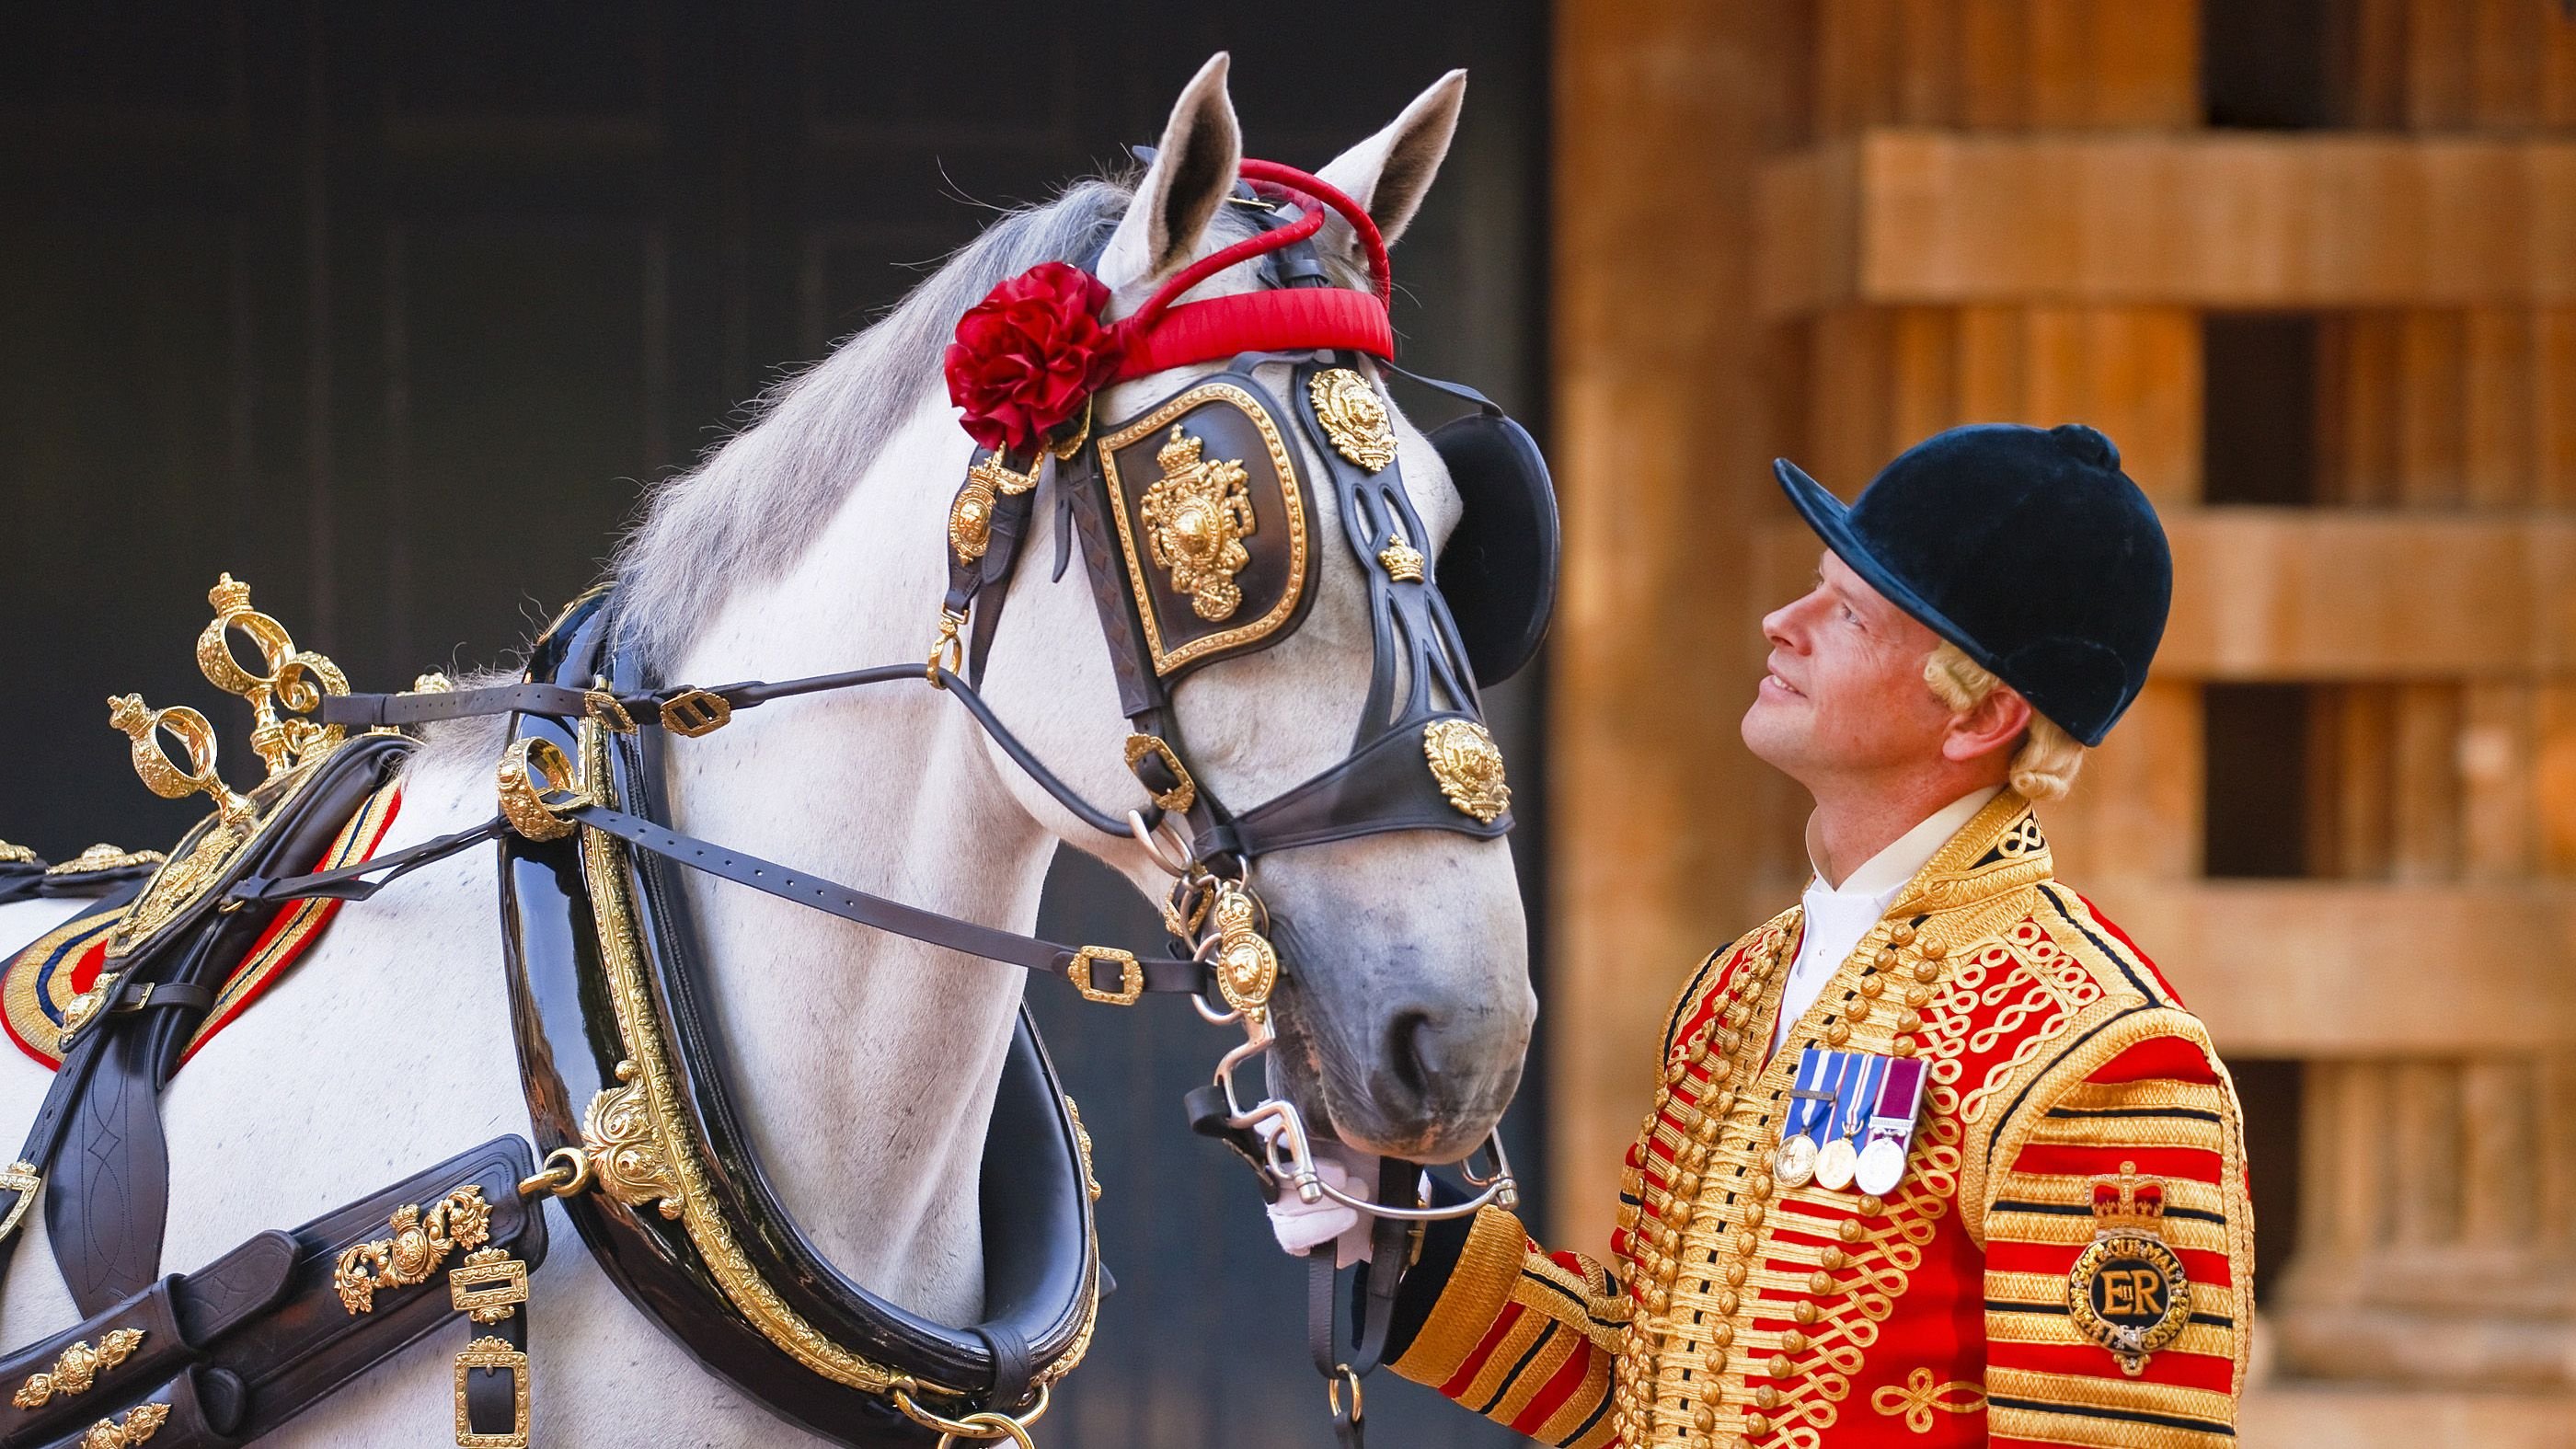 A Coachman and a horse at the Royal Mews, Buckingham Palace